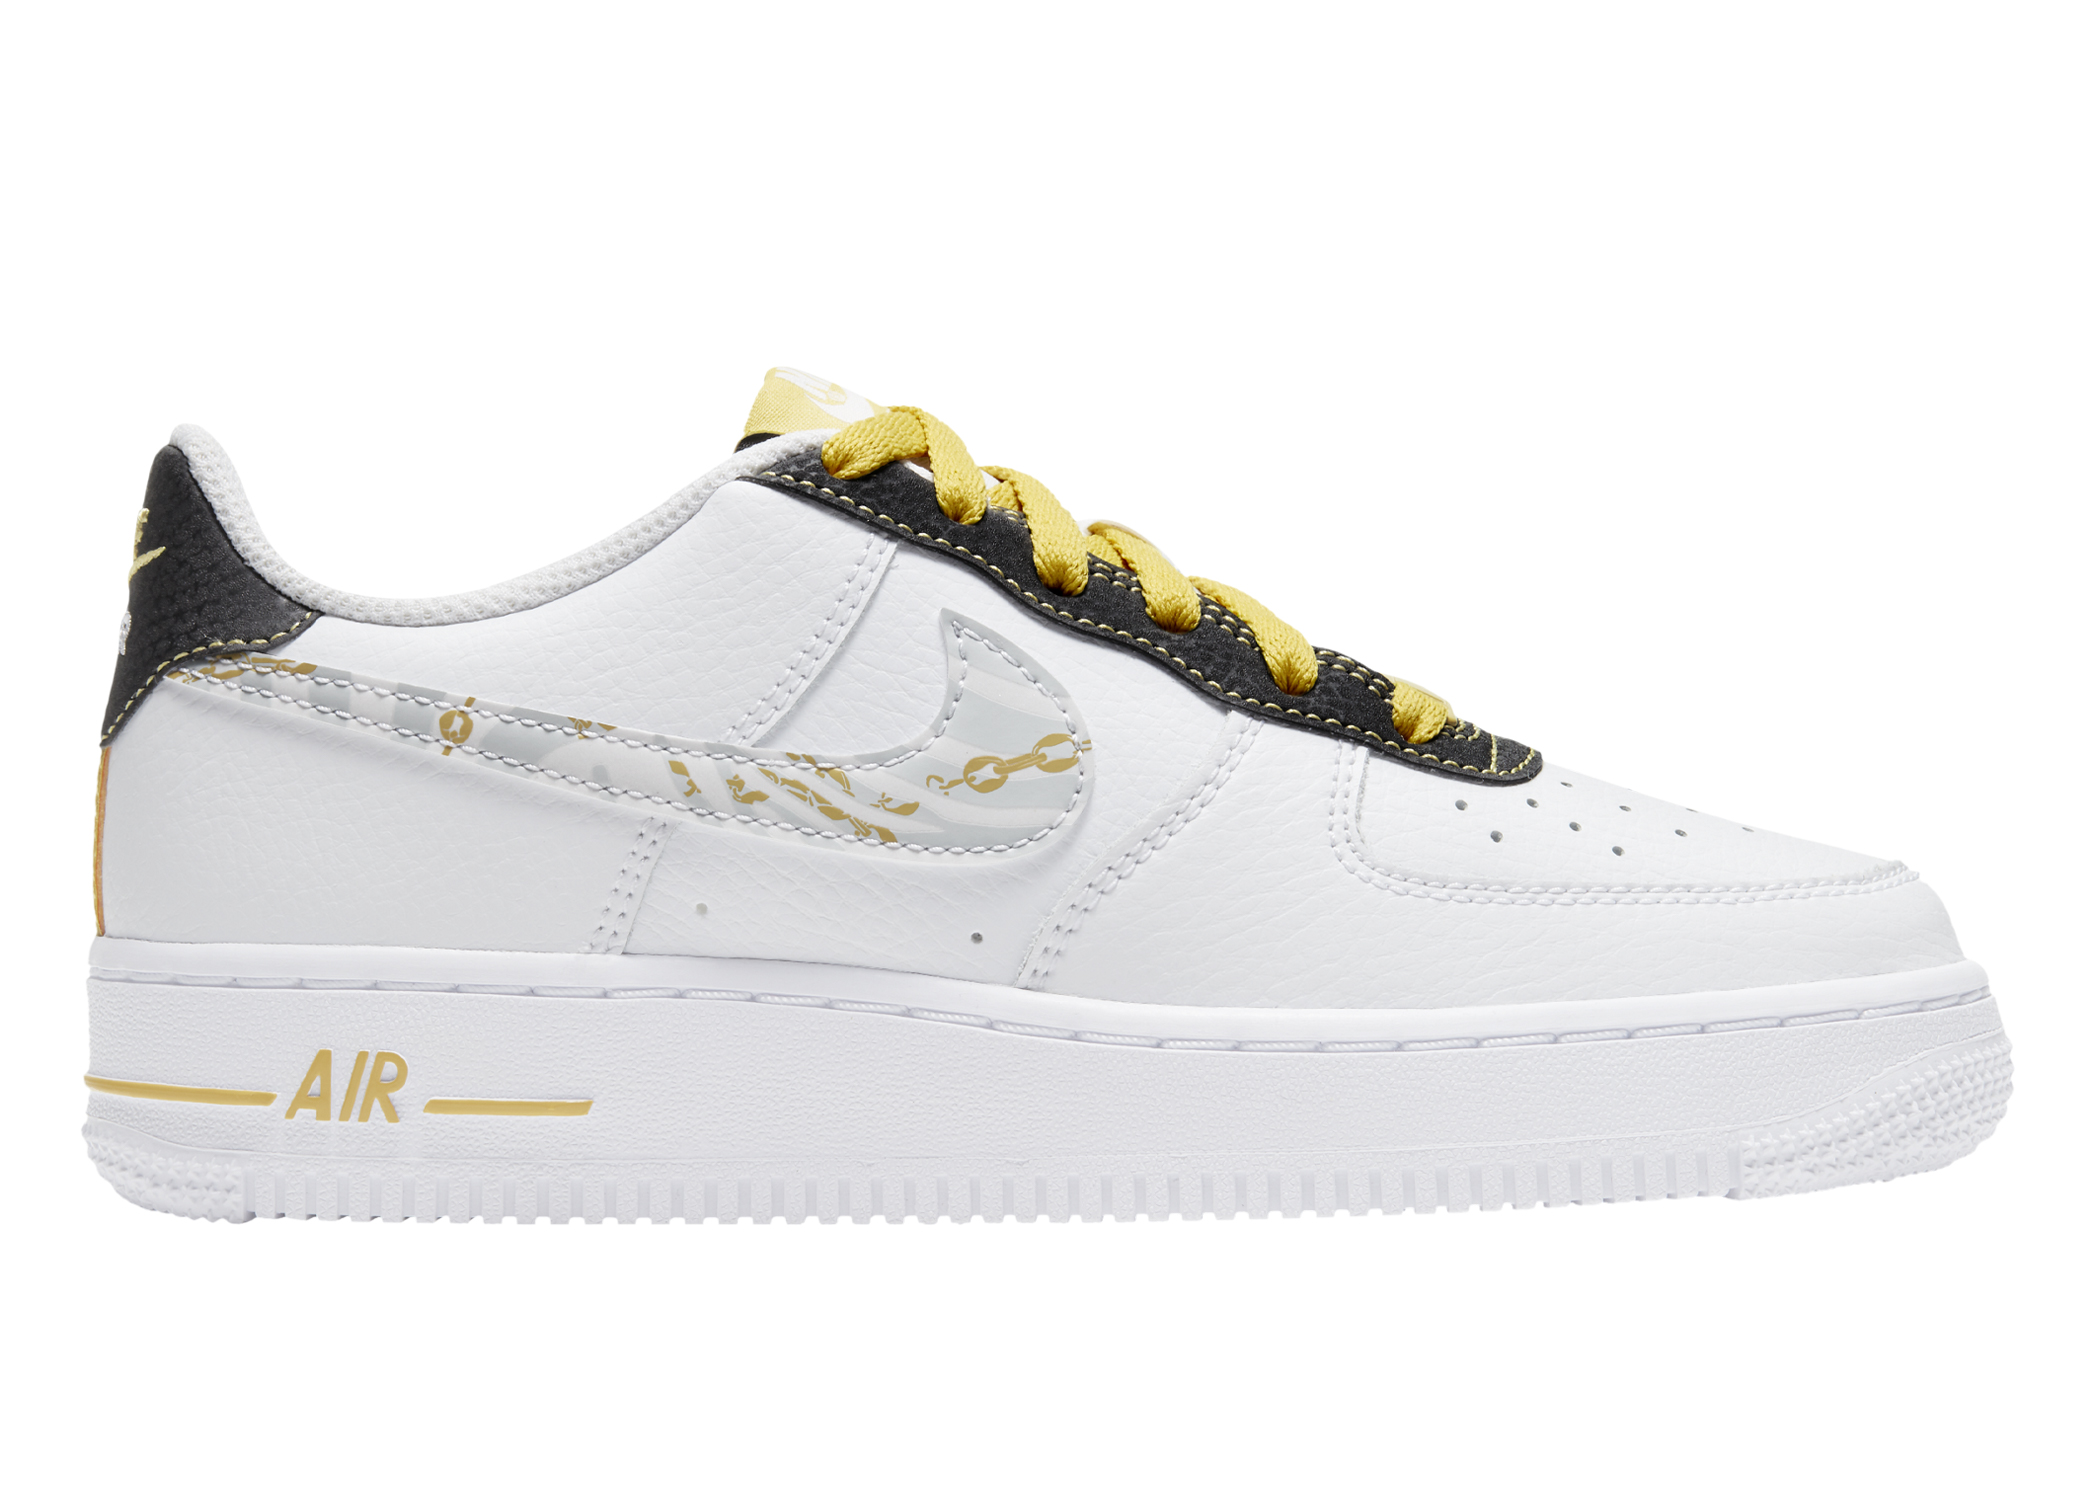 Nike Air Force 1 Low Gold Link Zebra (GS)